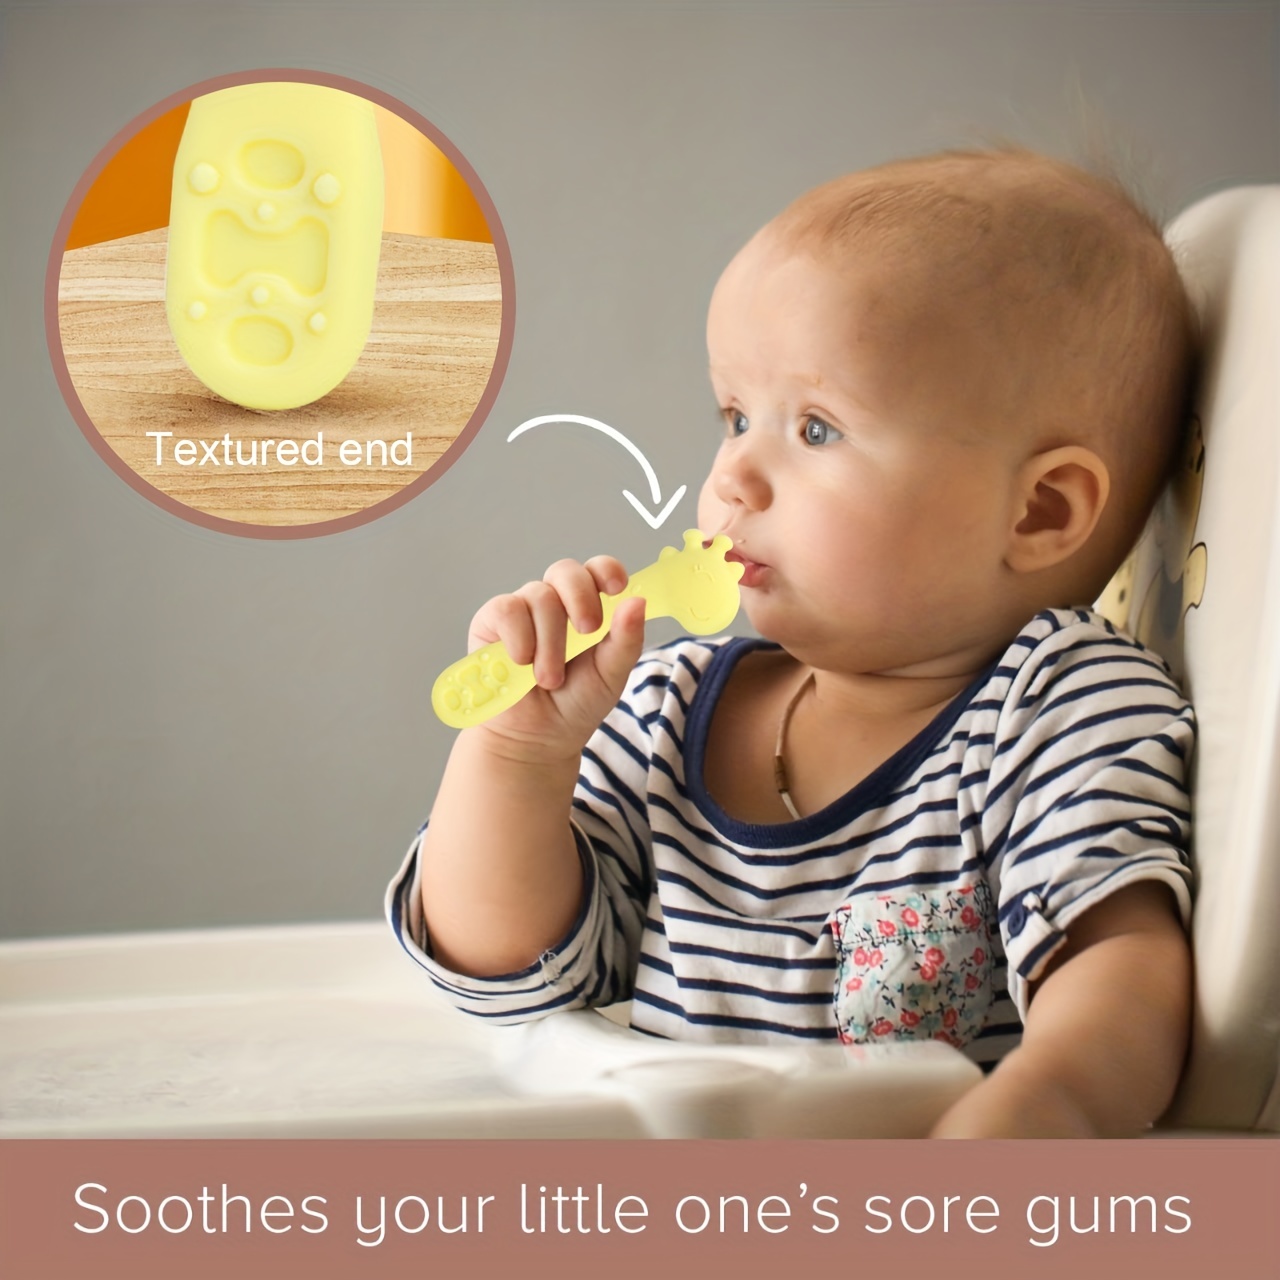 Silicone Baby Spoons For Baby Led Weaning, Bpa Free Silicone Baby